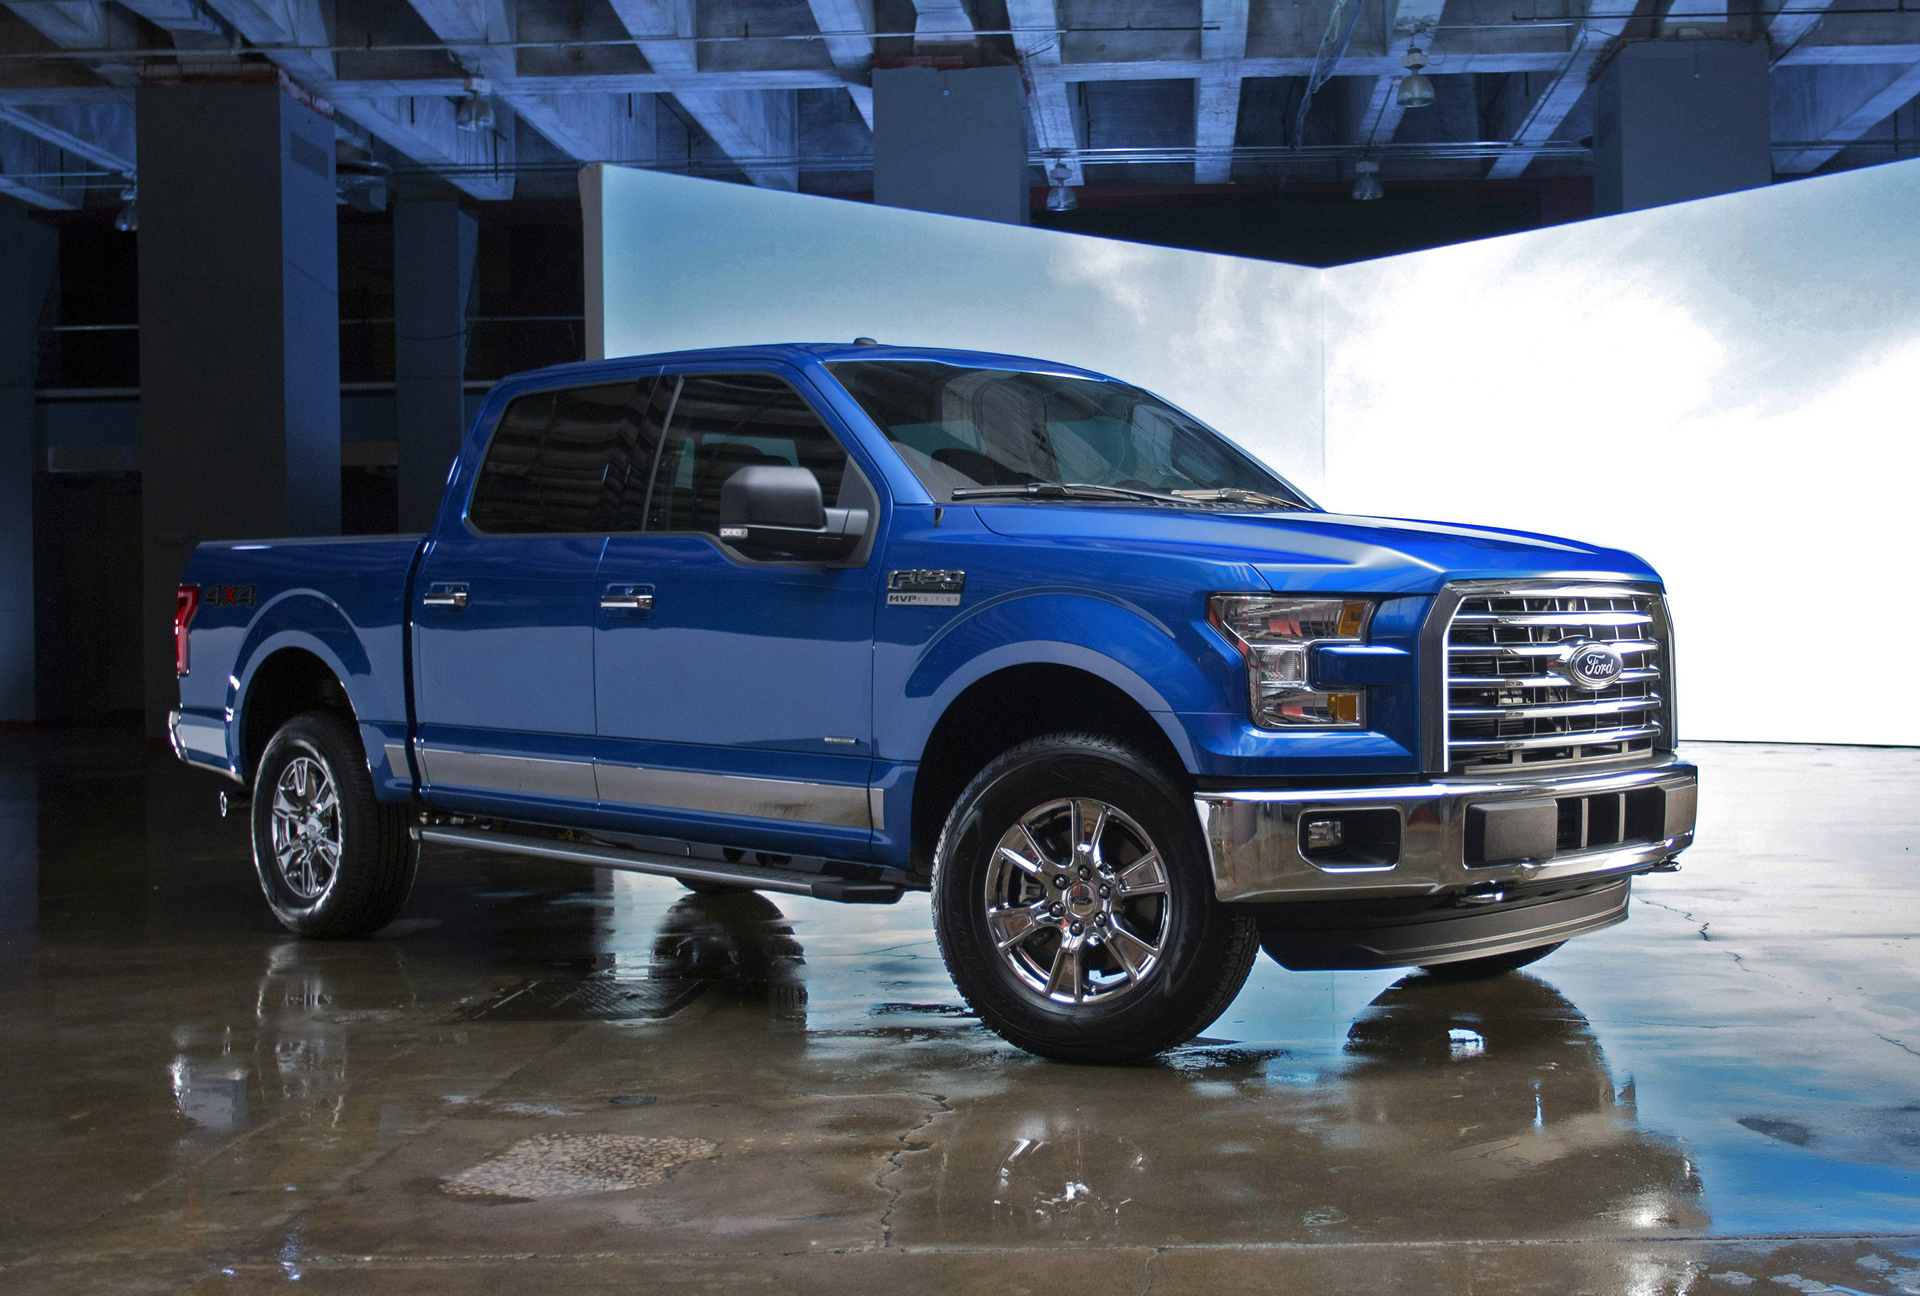 2016 Ford F-150 MVP Edition © Ford Motor Company